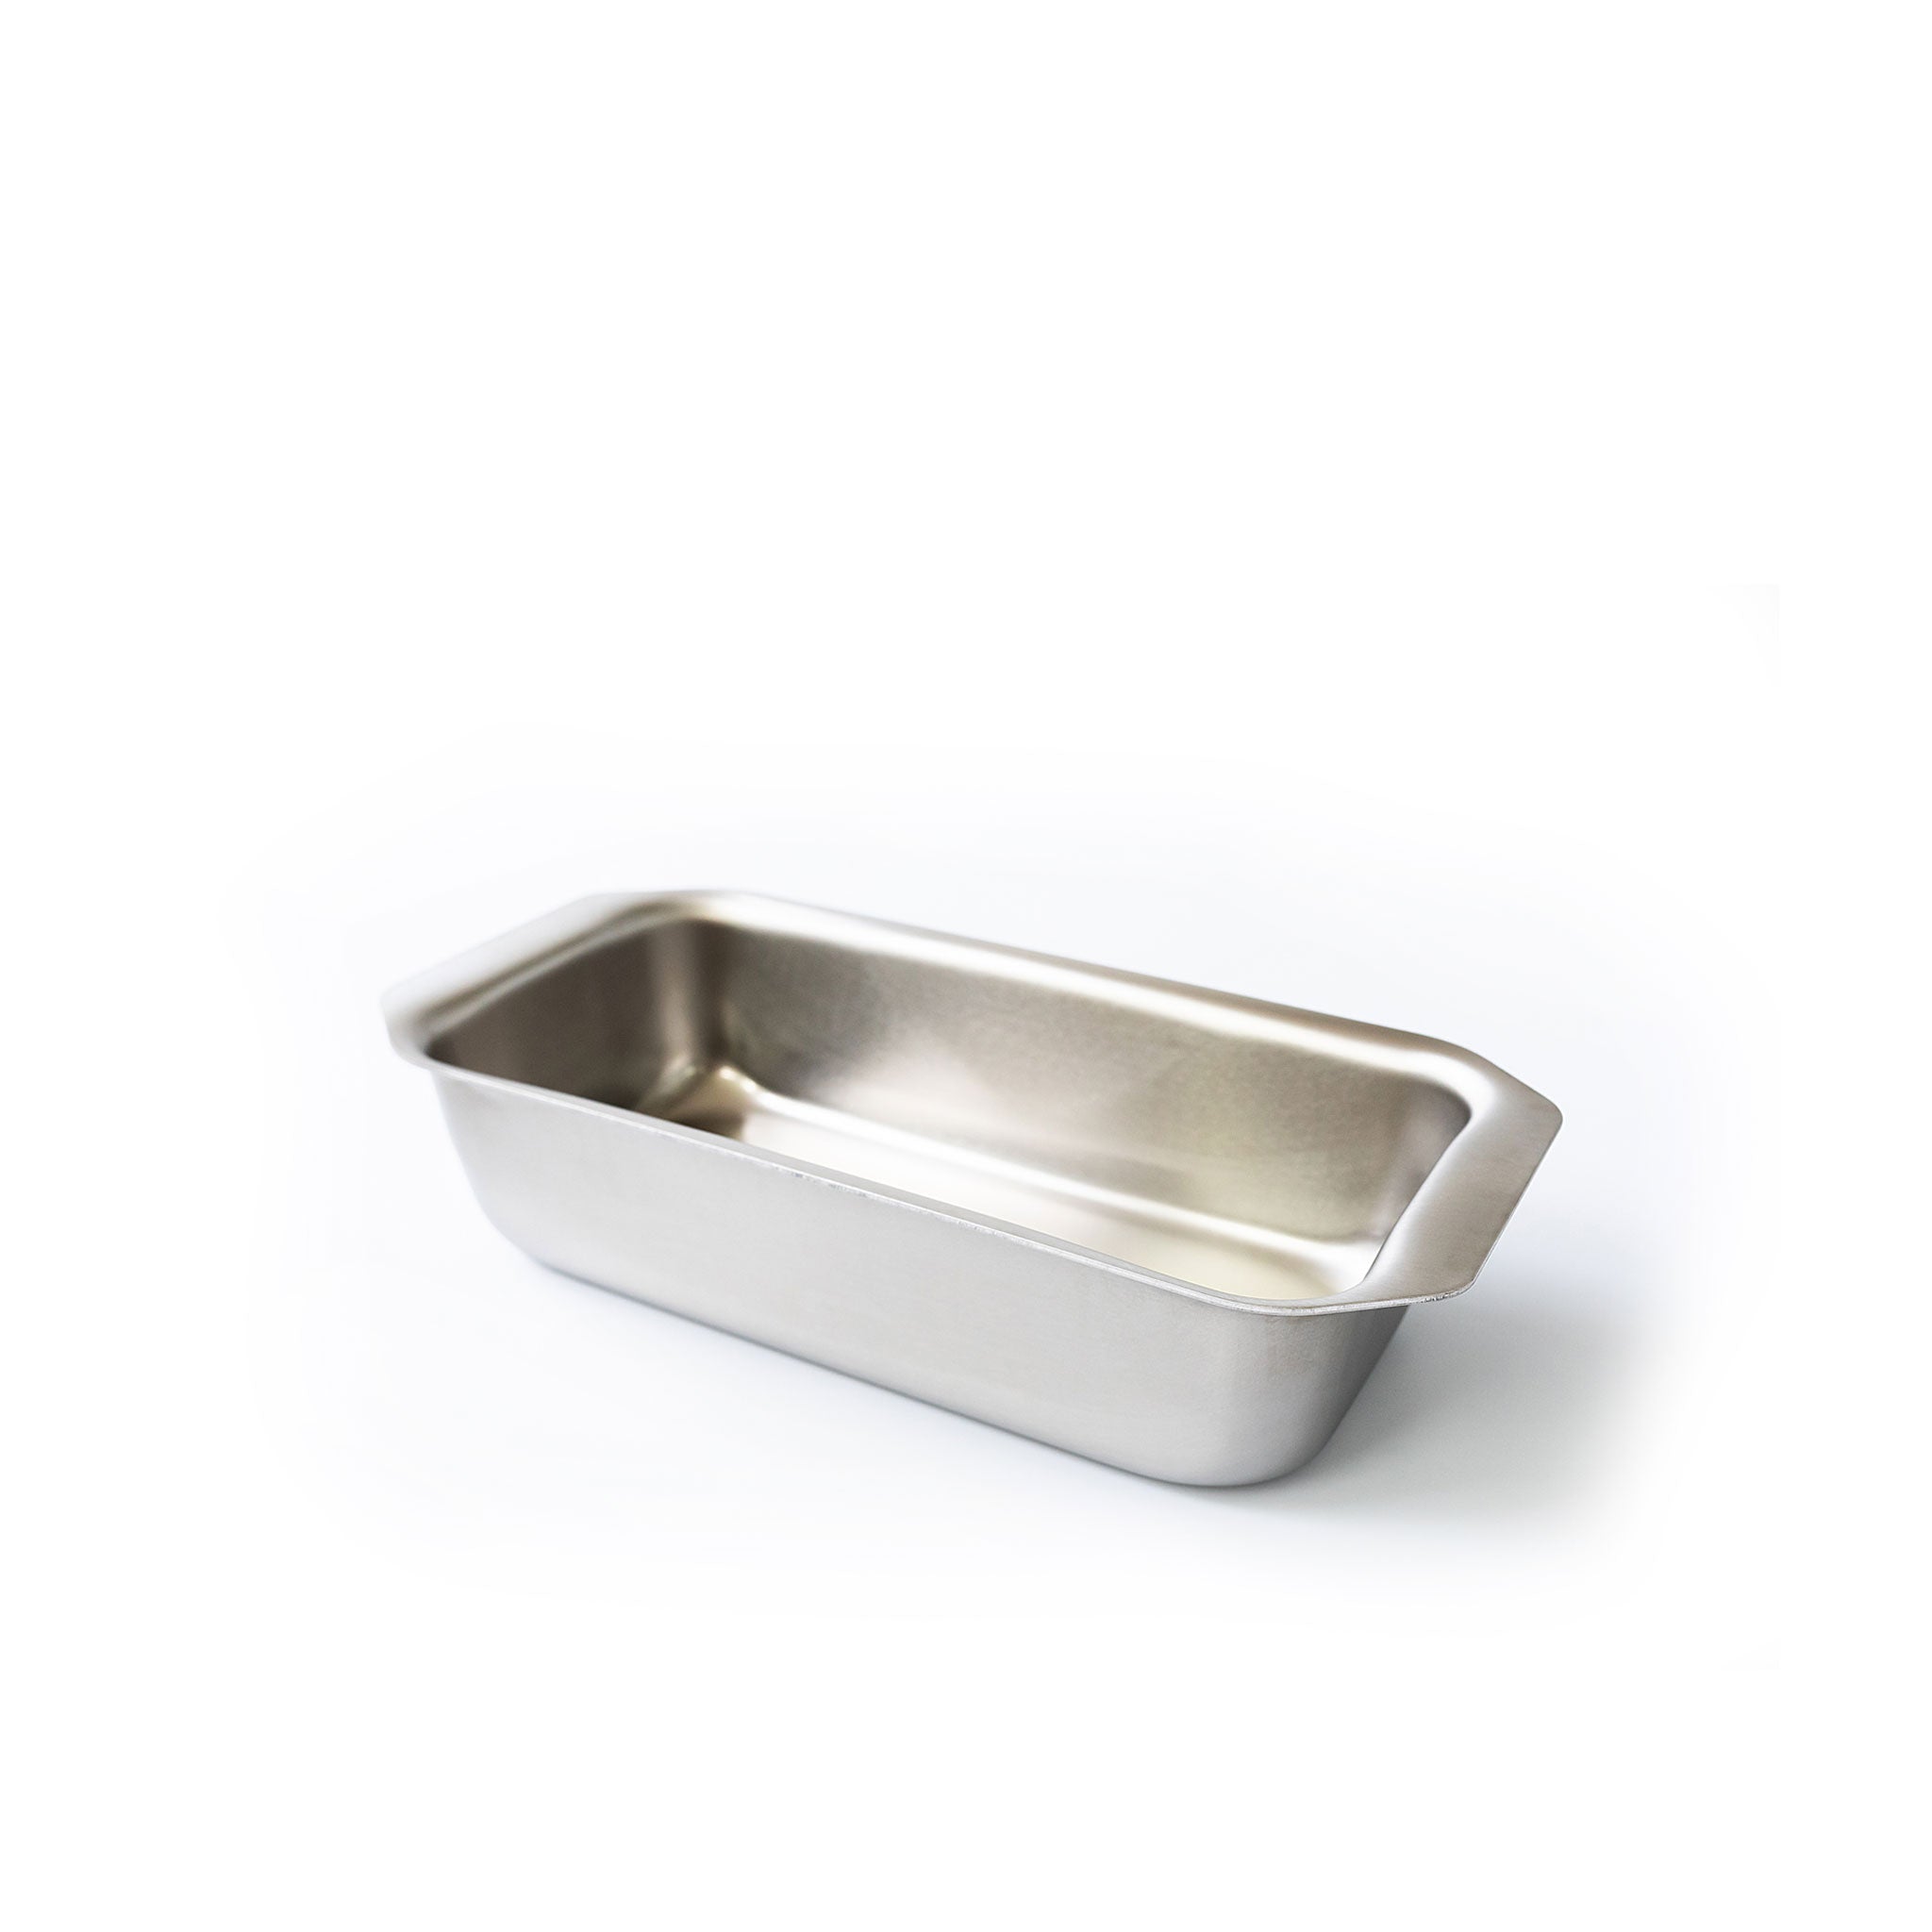 Tablecraft 10749 Loaf Pan 10-1/8 X 5-1/4 X 2-7/8 (12L With Handles)